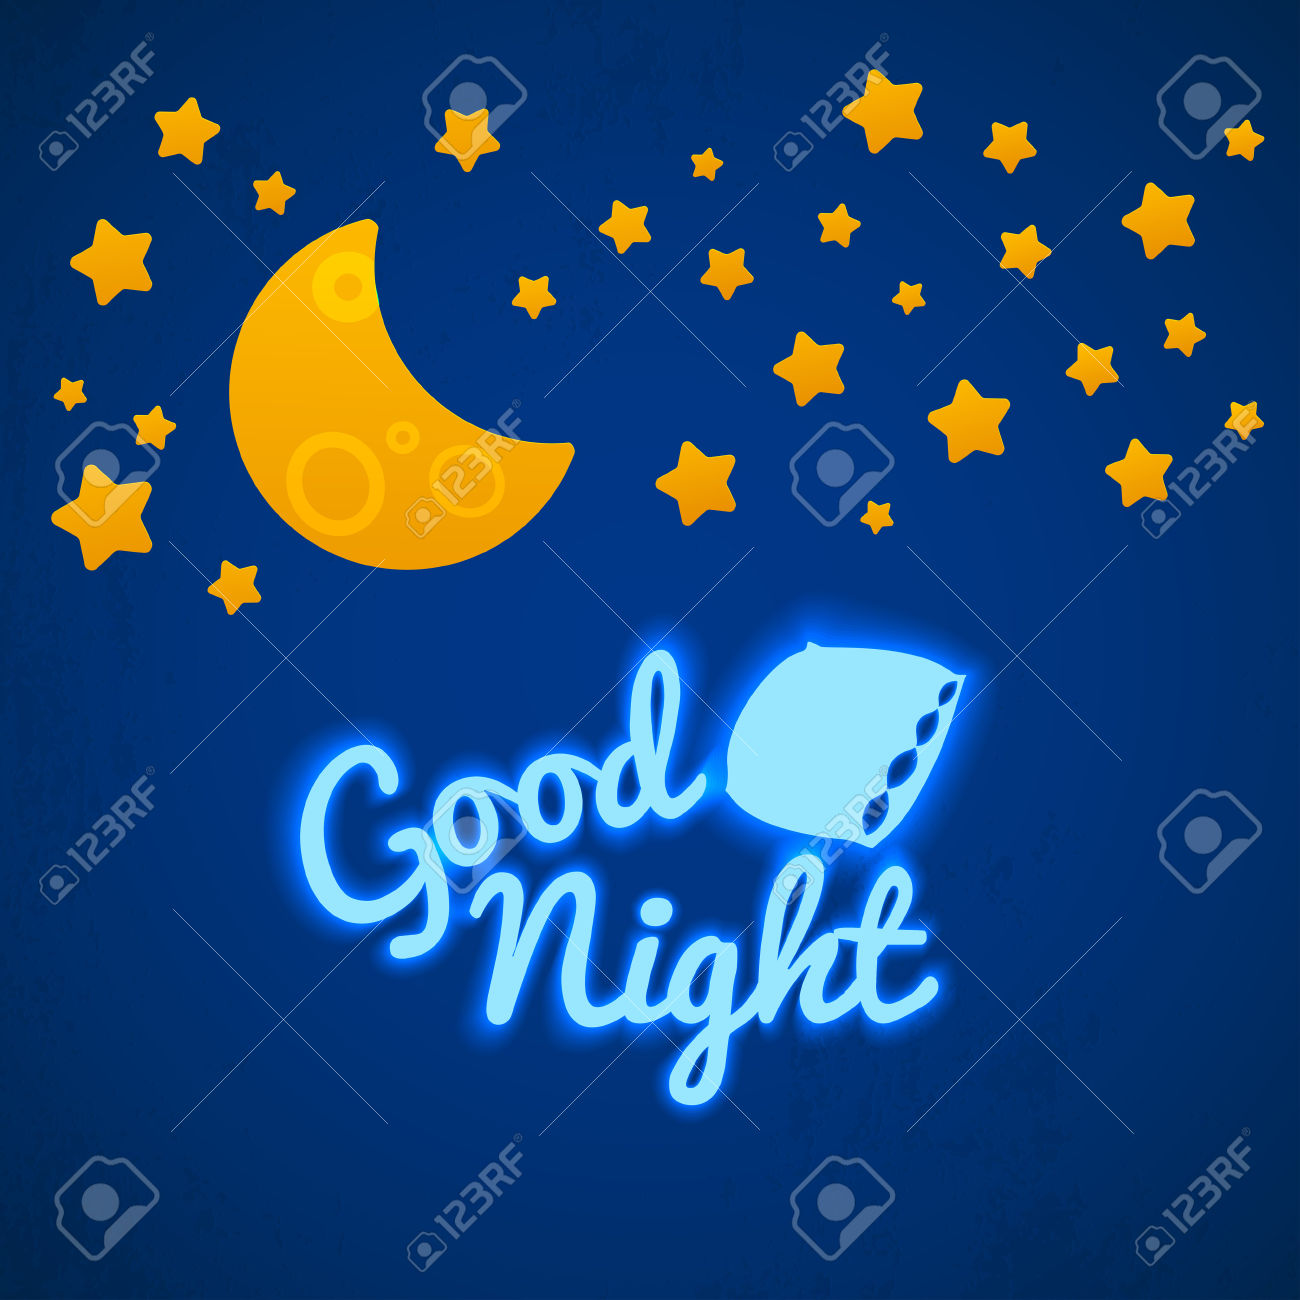 night clipart images - photo #46